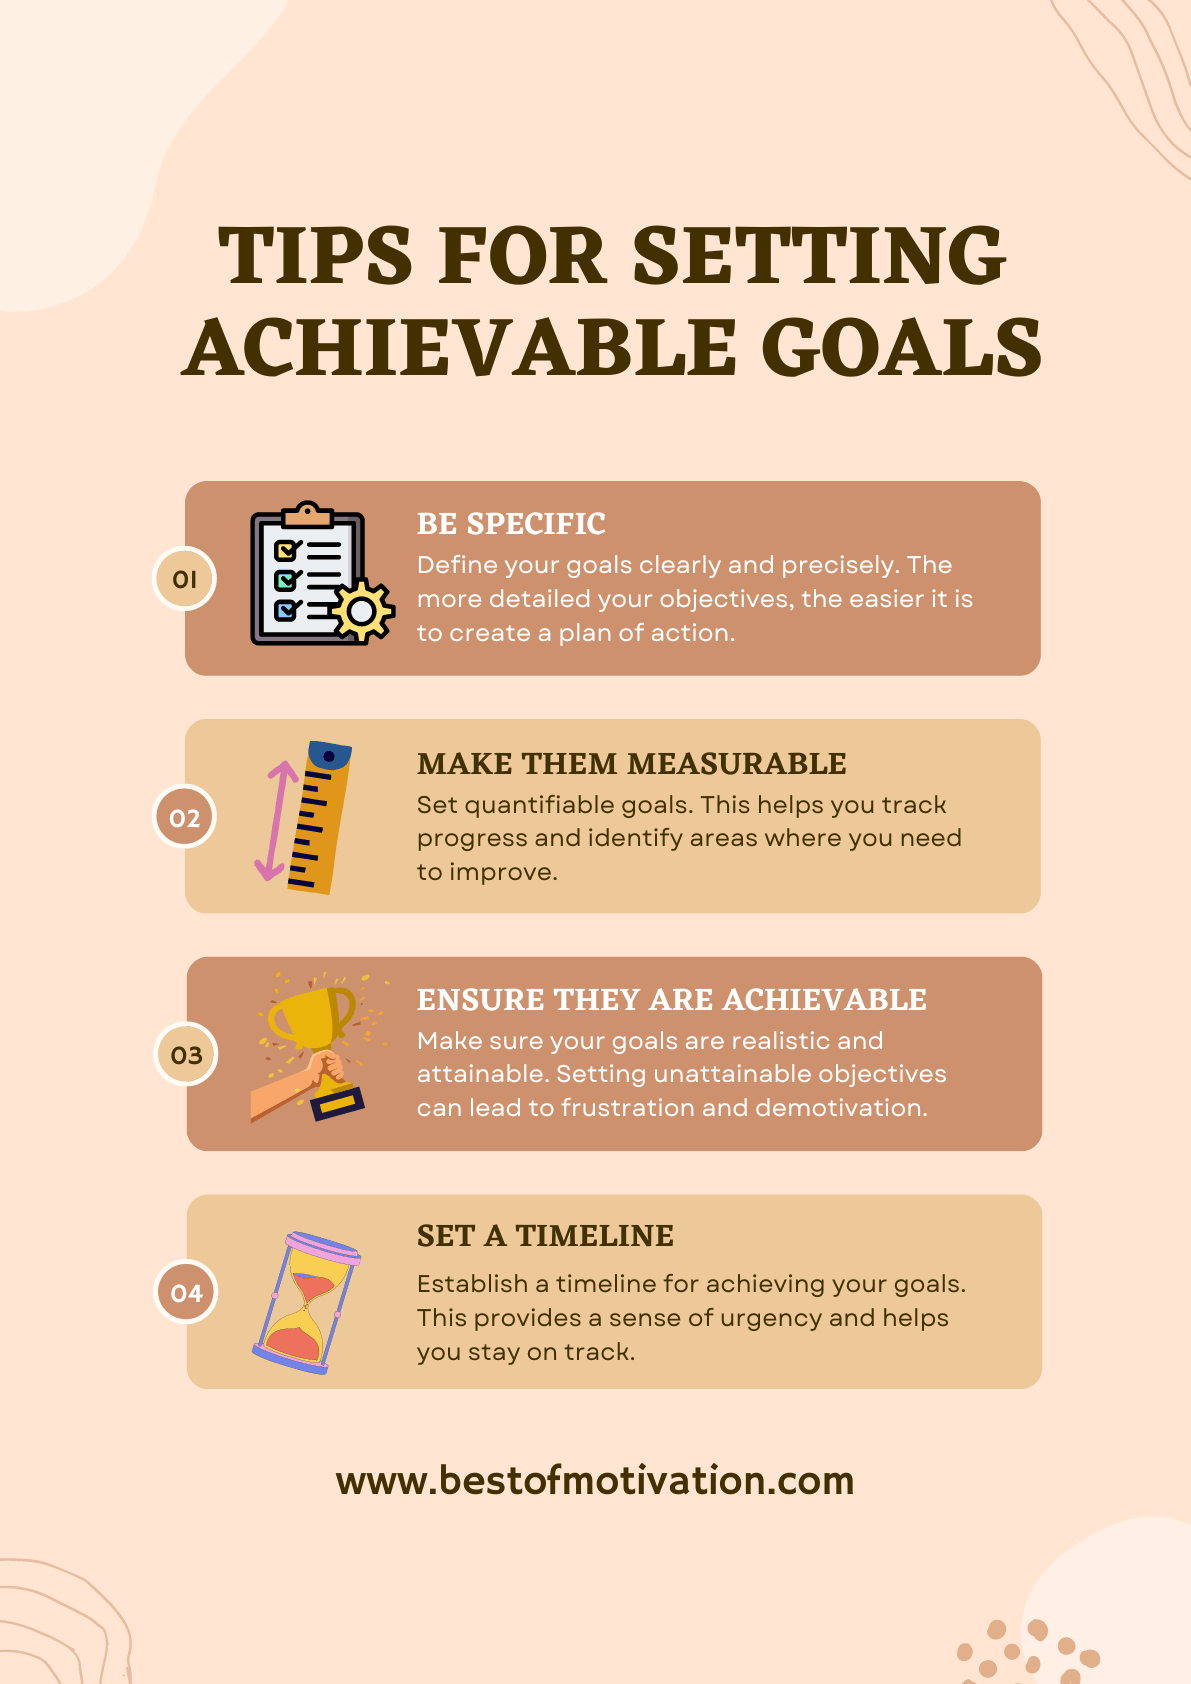 Tips for Setting Achievable Goals.
The first step in achieving any goal is to define it. Creating a plan of action is impossible without a clear idea of what you want to accomplish. Setting goals provides direction, helps prioritize tasks, and keeps you motivated. When you have a clear target to aim for, you're more likely to take action and make progress toward your aspirations.